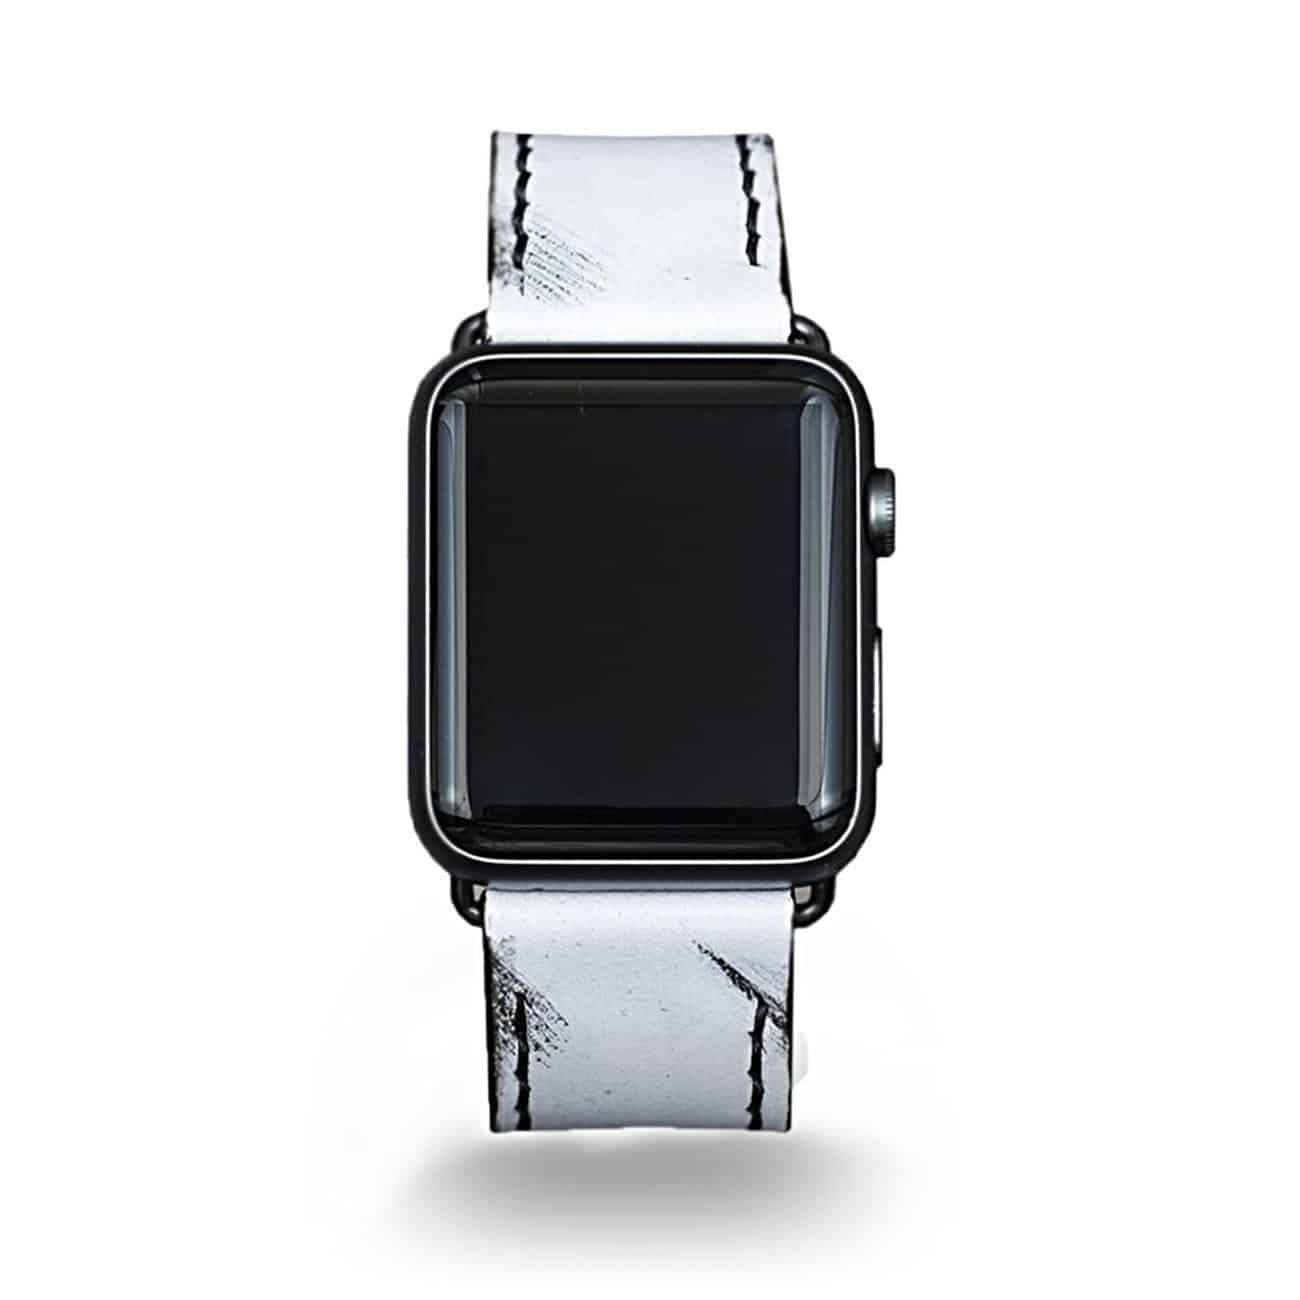 Strapley Apple Watch leather band in Off White